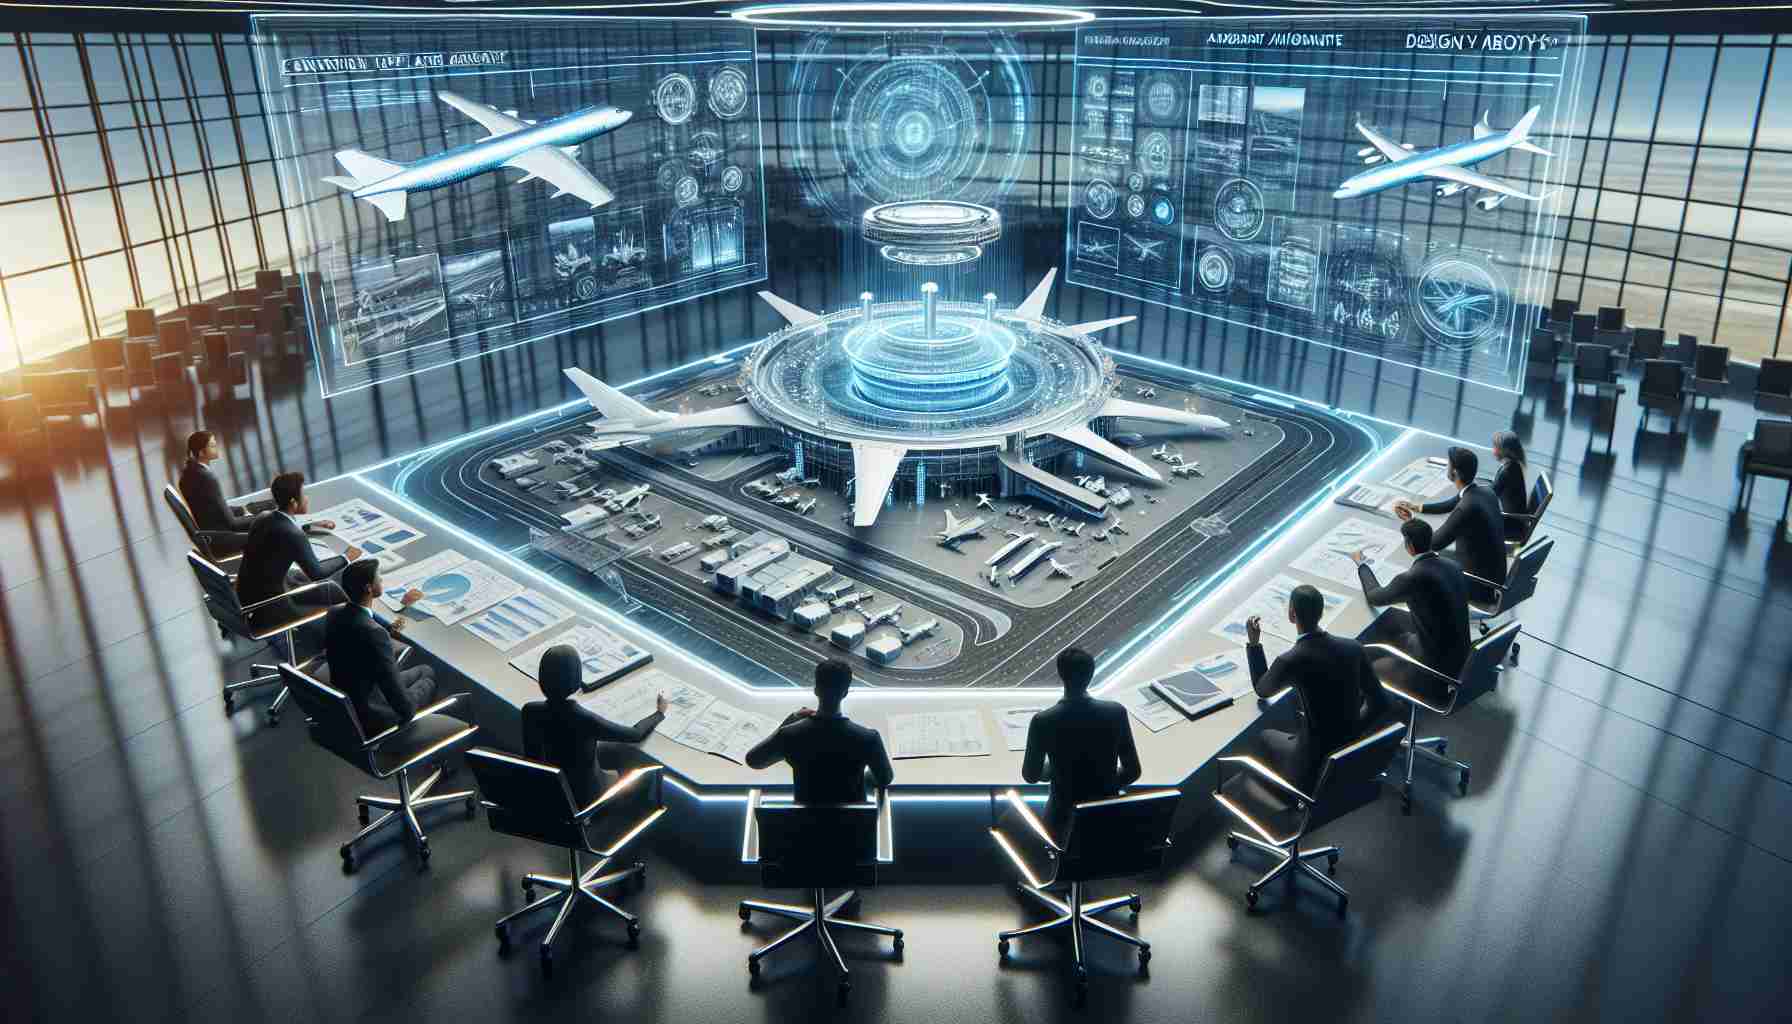 Create a highly detailed, realistic image of an aviation company's announcement about their plans for a cutting-edge, state-of-the-art facility. The scene should include a large, futuristic design model of the facility displayed on a table in the center, with modern aviation blueprints and plans scattered around. Some executives and engineers, comprising of diverse races and genders, are discussing passionately about these plans. The environment around them should seem high-tech, with interactive holographic displays and sleek, streamlined office furniture.